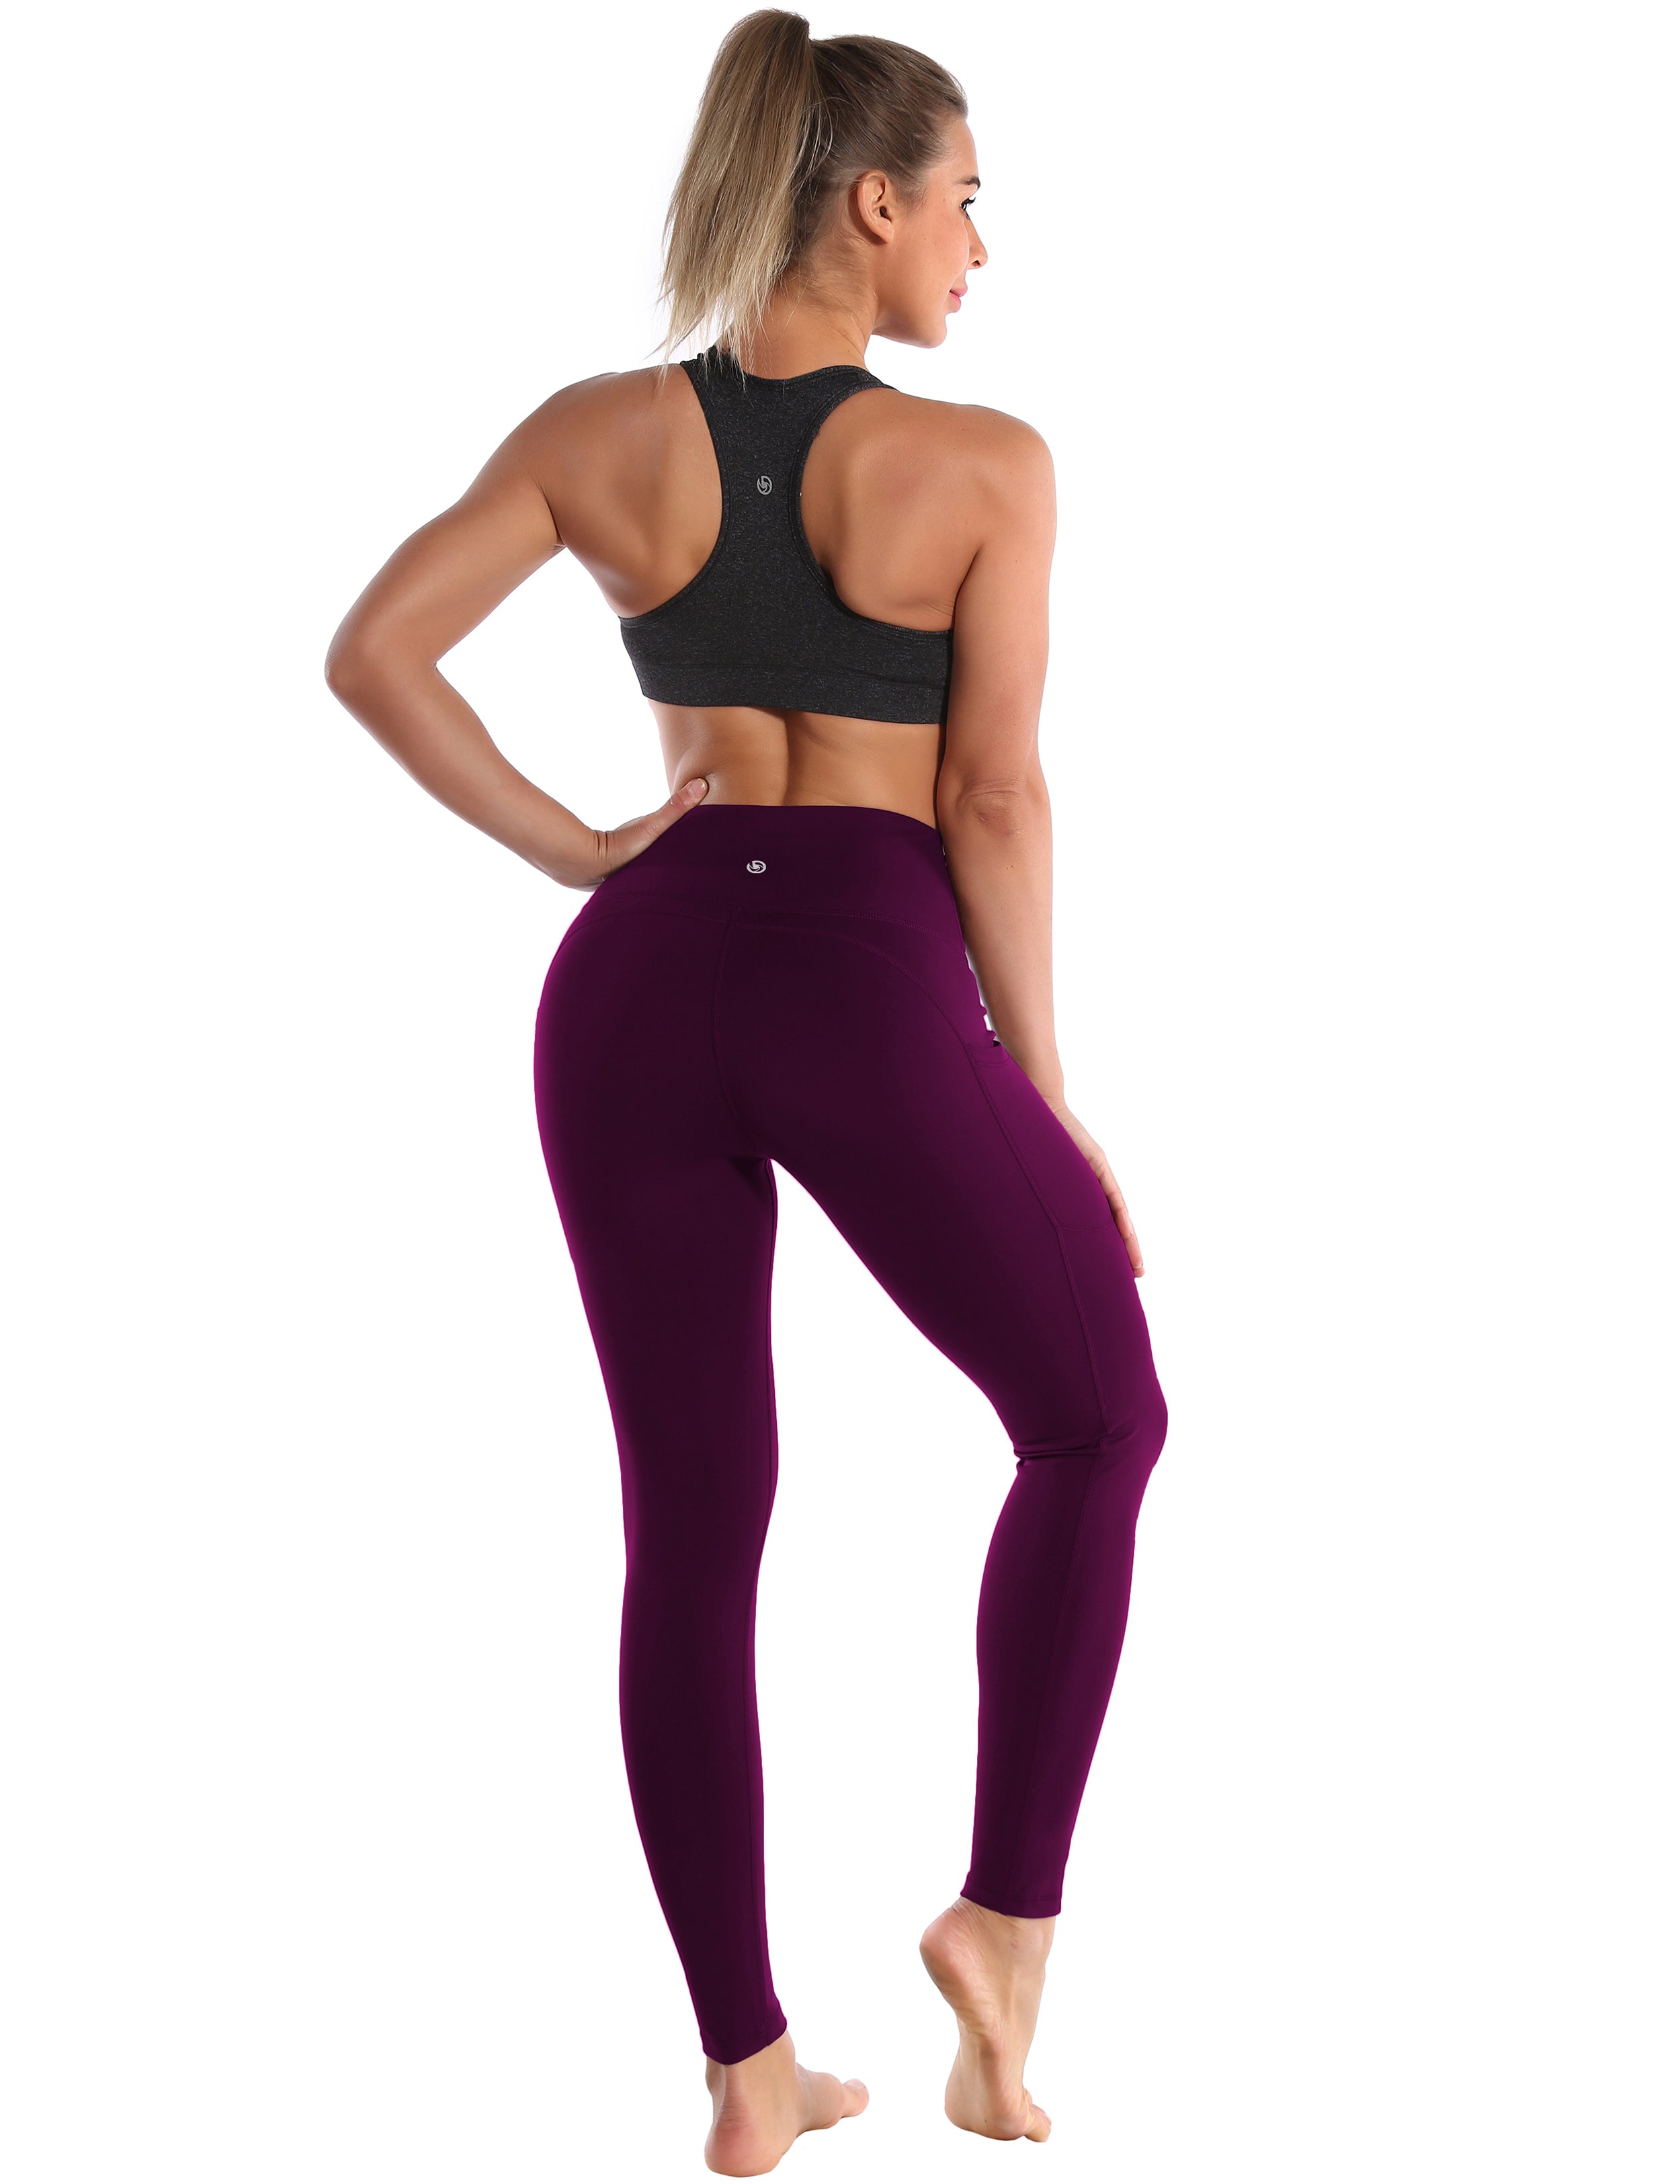 Hip Line Side Pockets Golf Pants plum Sexy Hip Line Side Pockets 75%Nylon/25%Spandex Fabric doesn't attract lint easily 4-way stretch No see-through Moisture-wicking Tummy control Inner pocket Two lengths